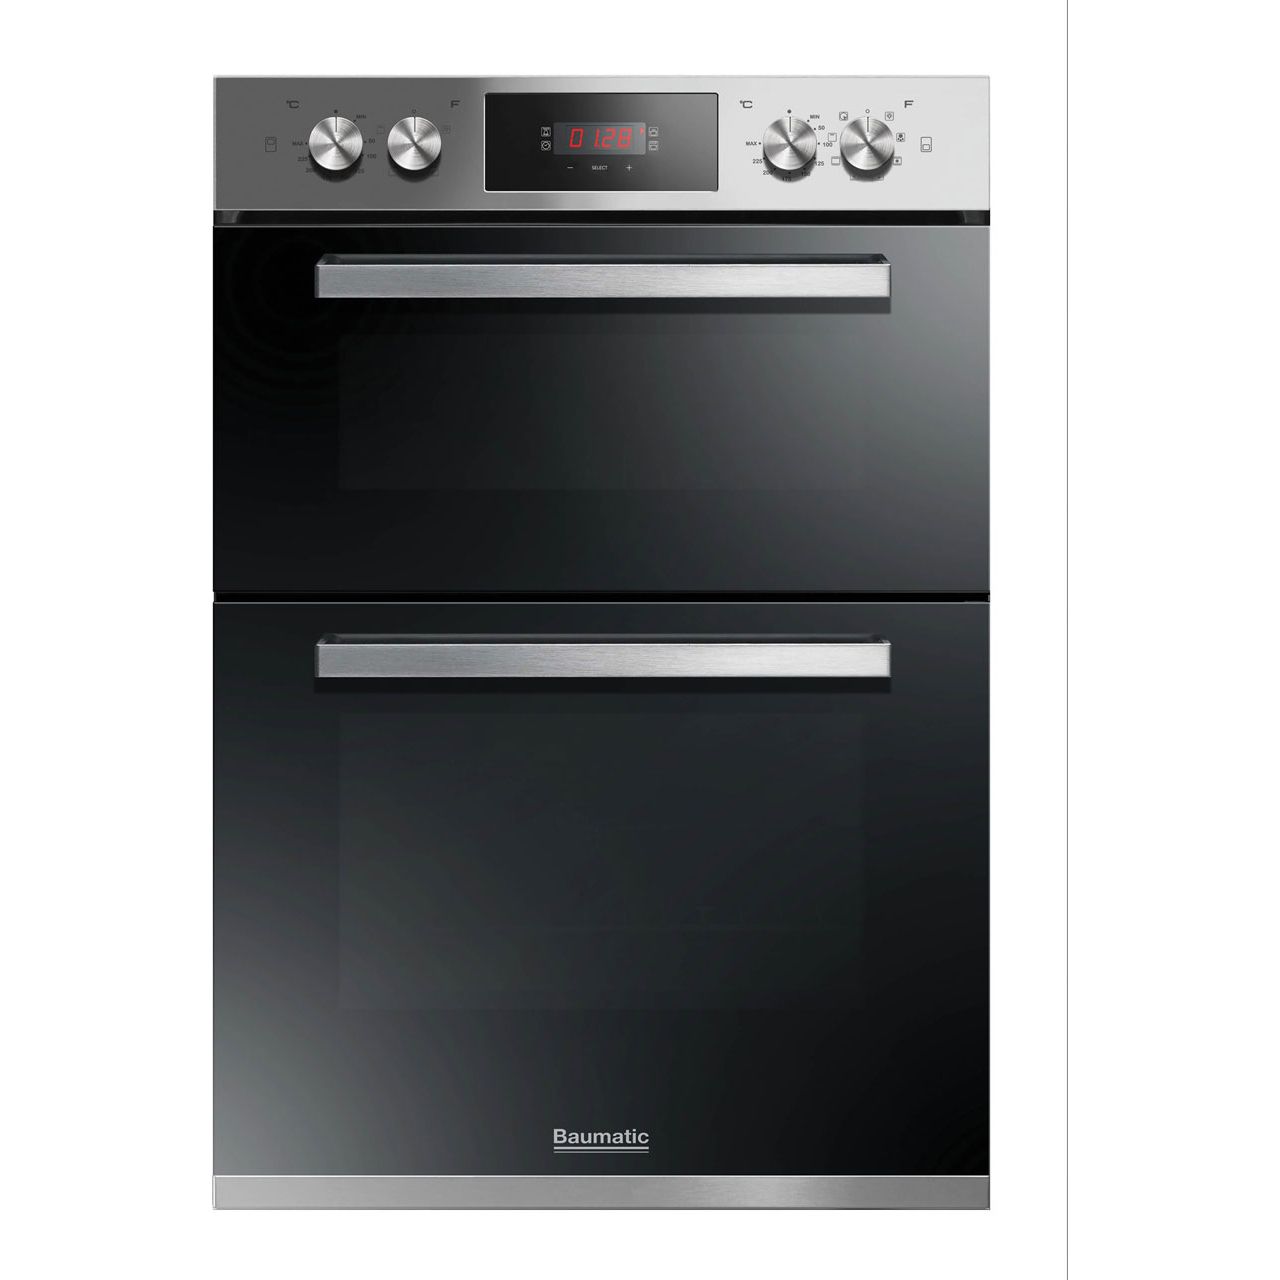 Baumatic BODM984X Built In Double Oven Review